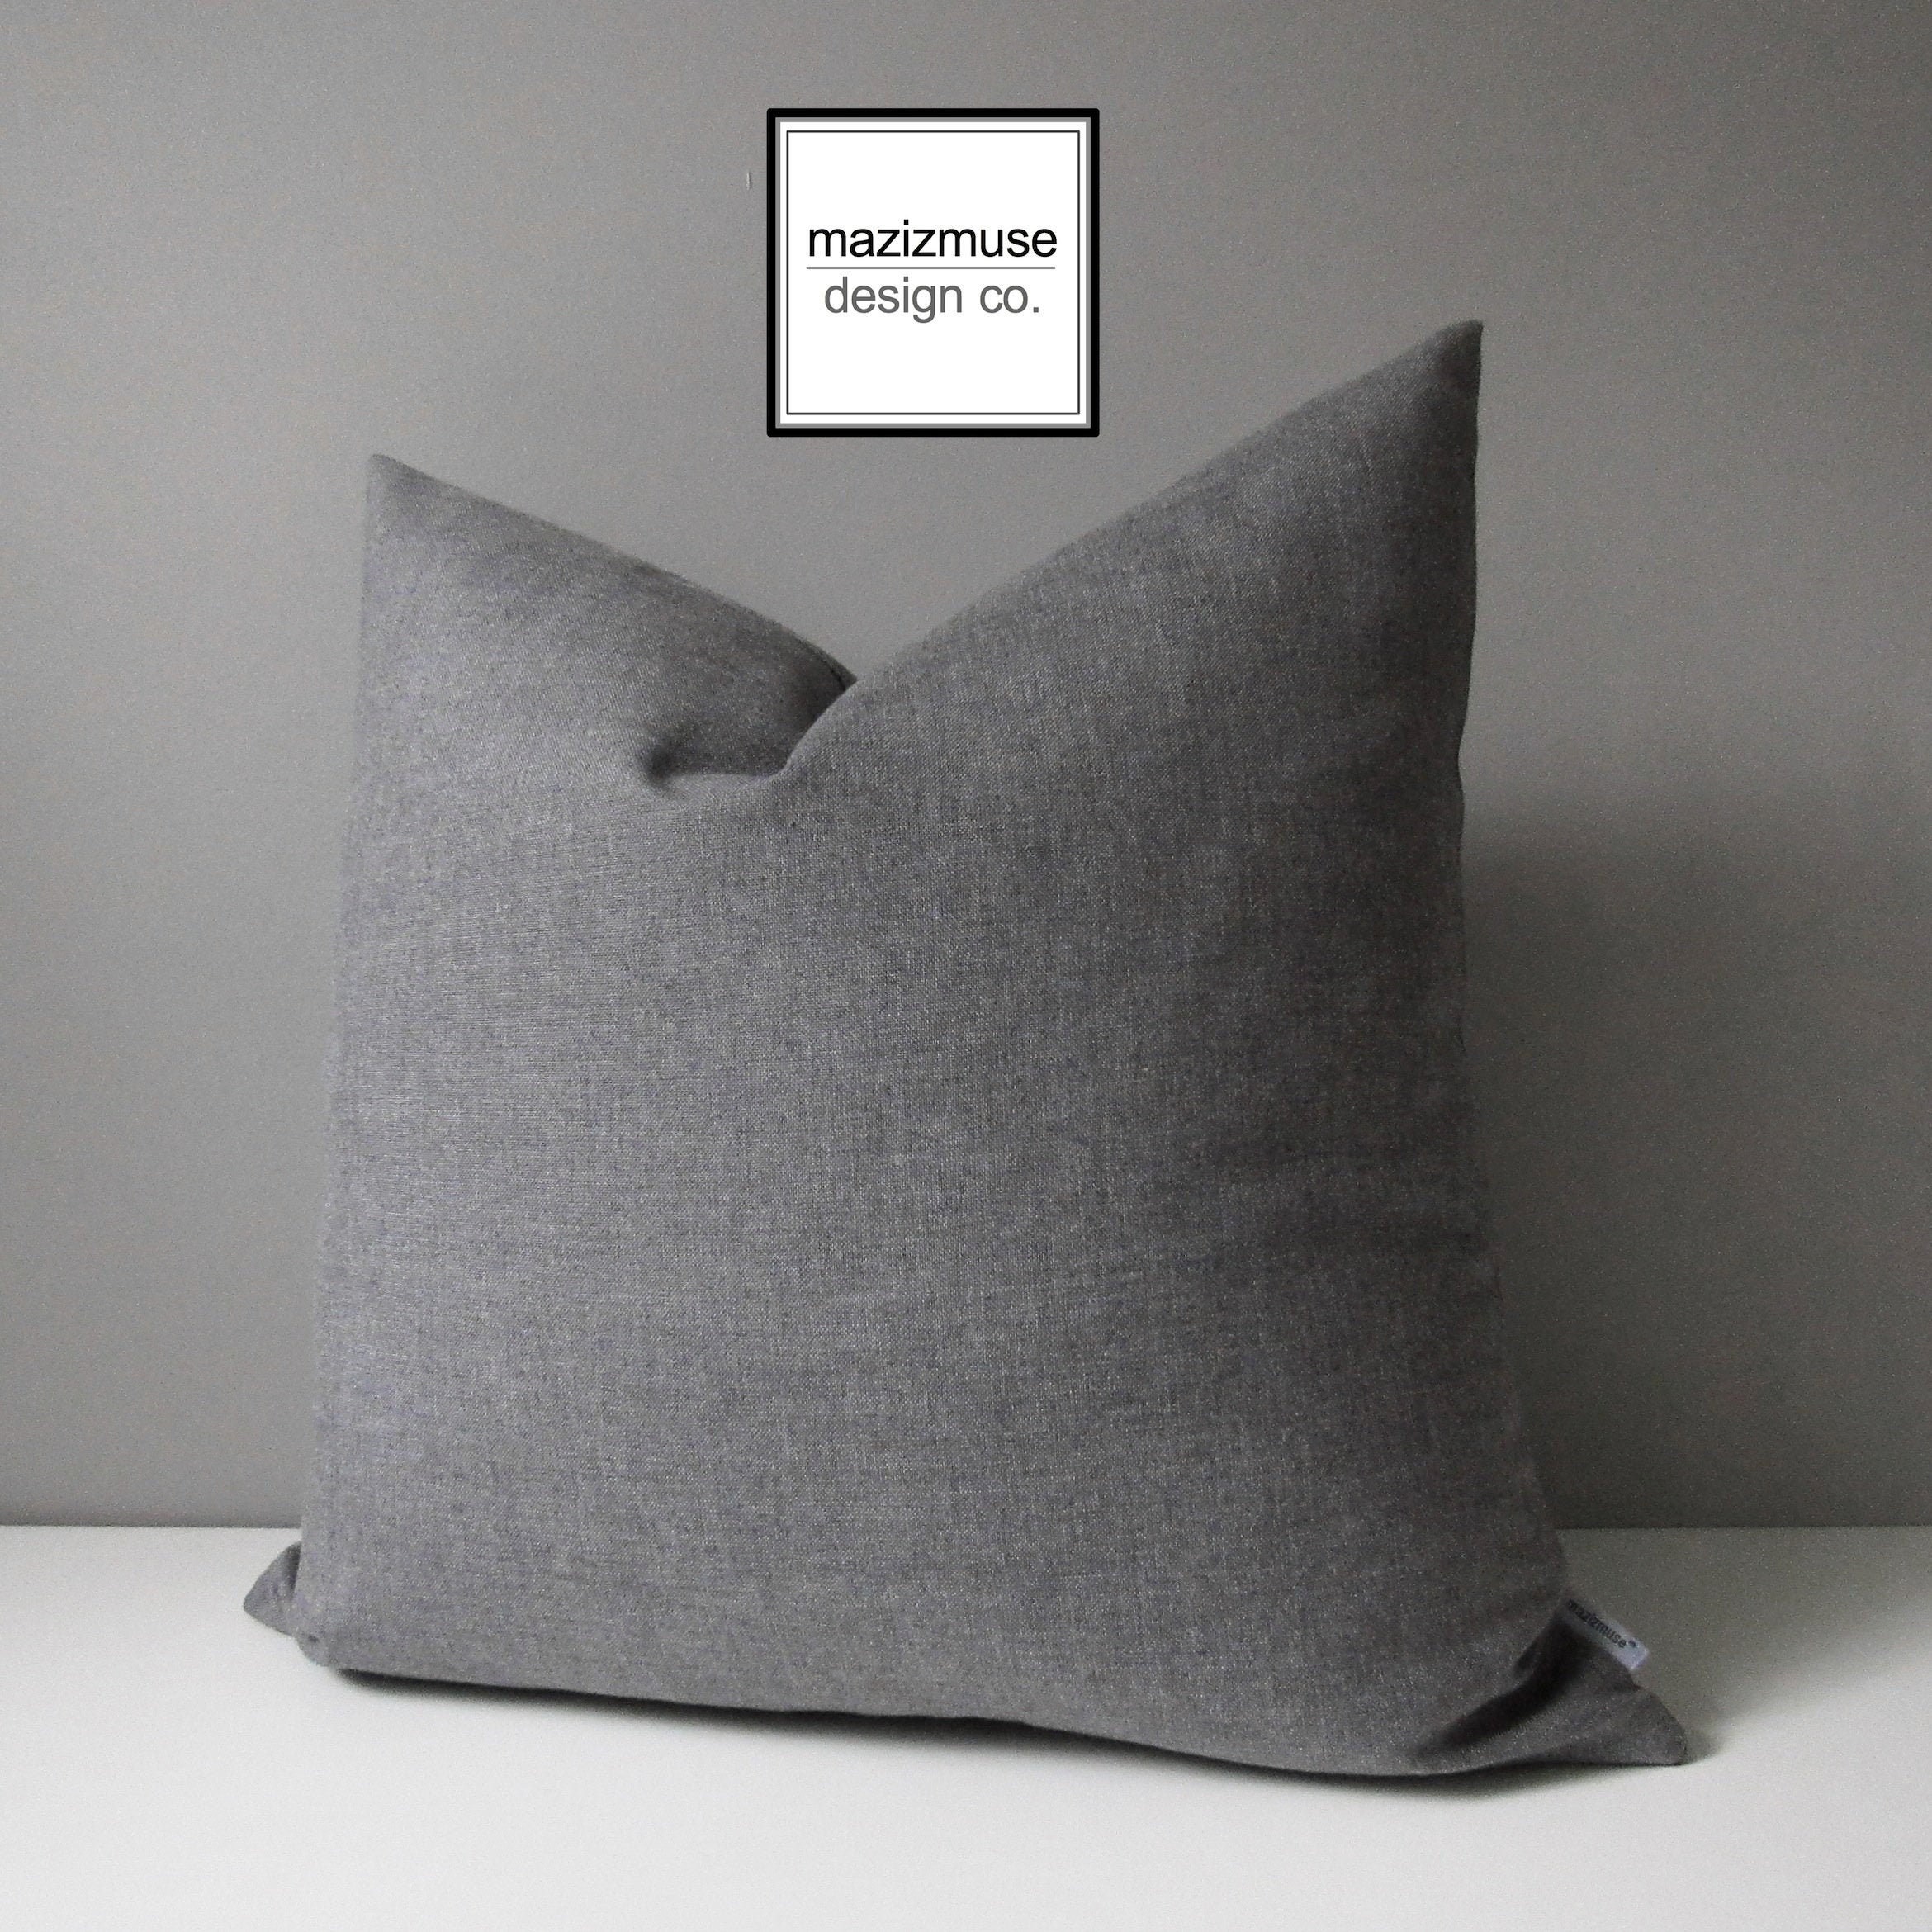 Pillow Insert 18 inch (45cmX45cm) - Outdoor Indoor Pillow Form - Purchase  with Mazizmuse Pillow Covers Only